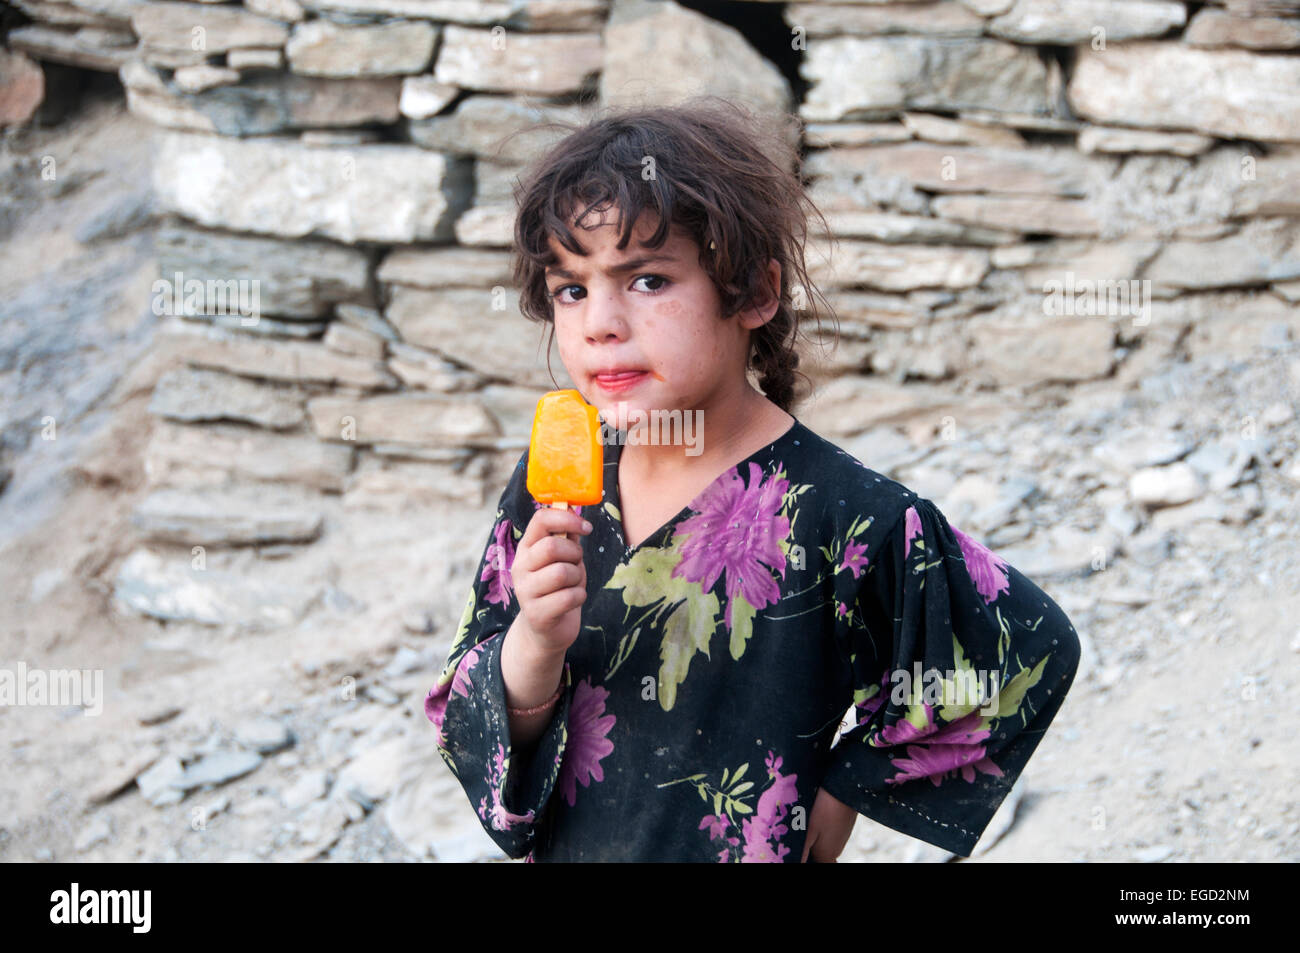 Kabul, Afghanistan, poor neighbourhood. Young girl looking defiant and licking a lollipop Stock Photo